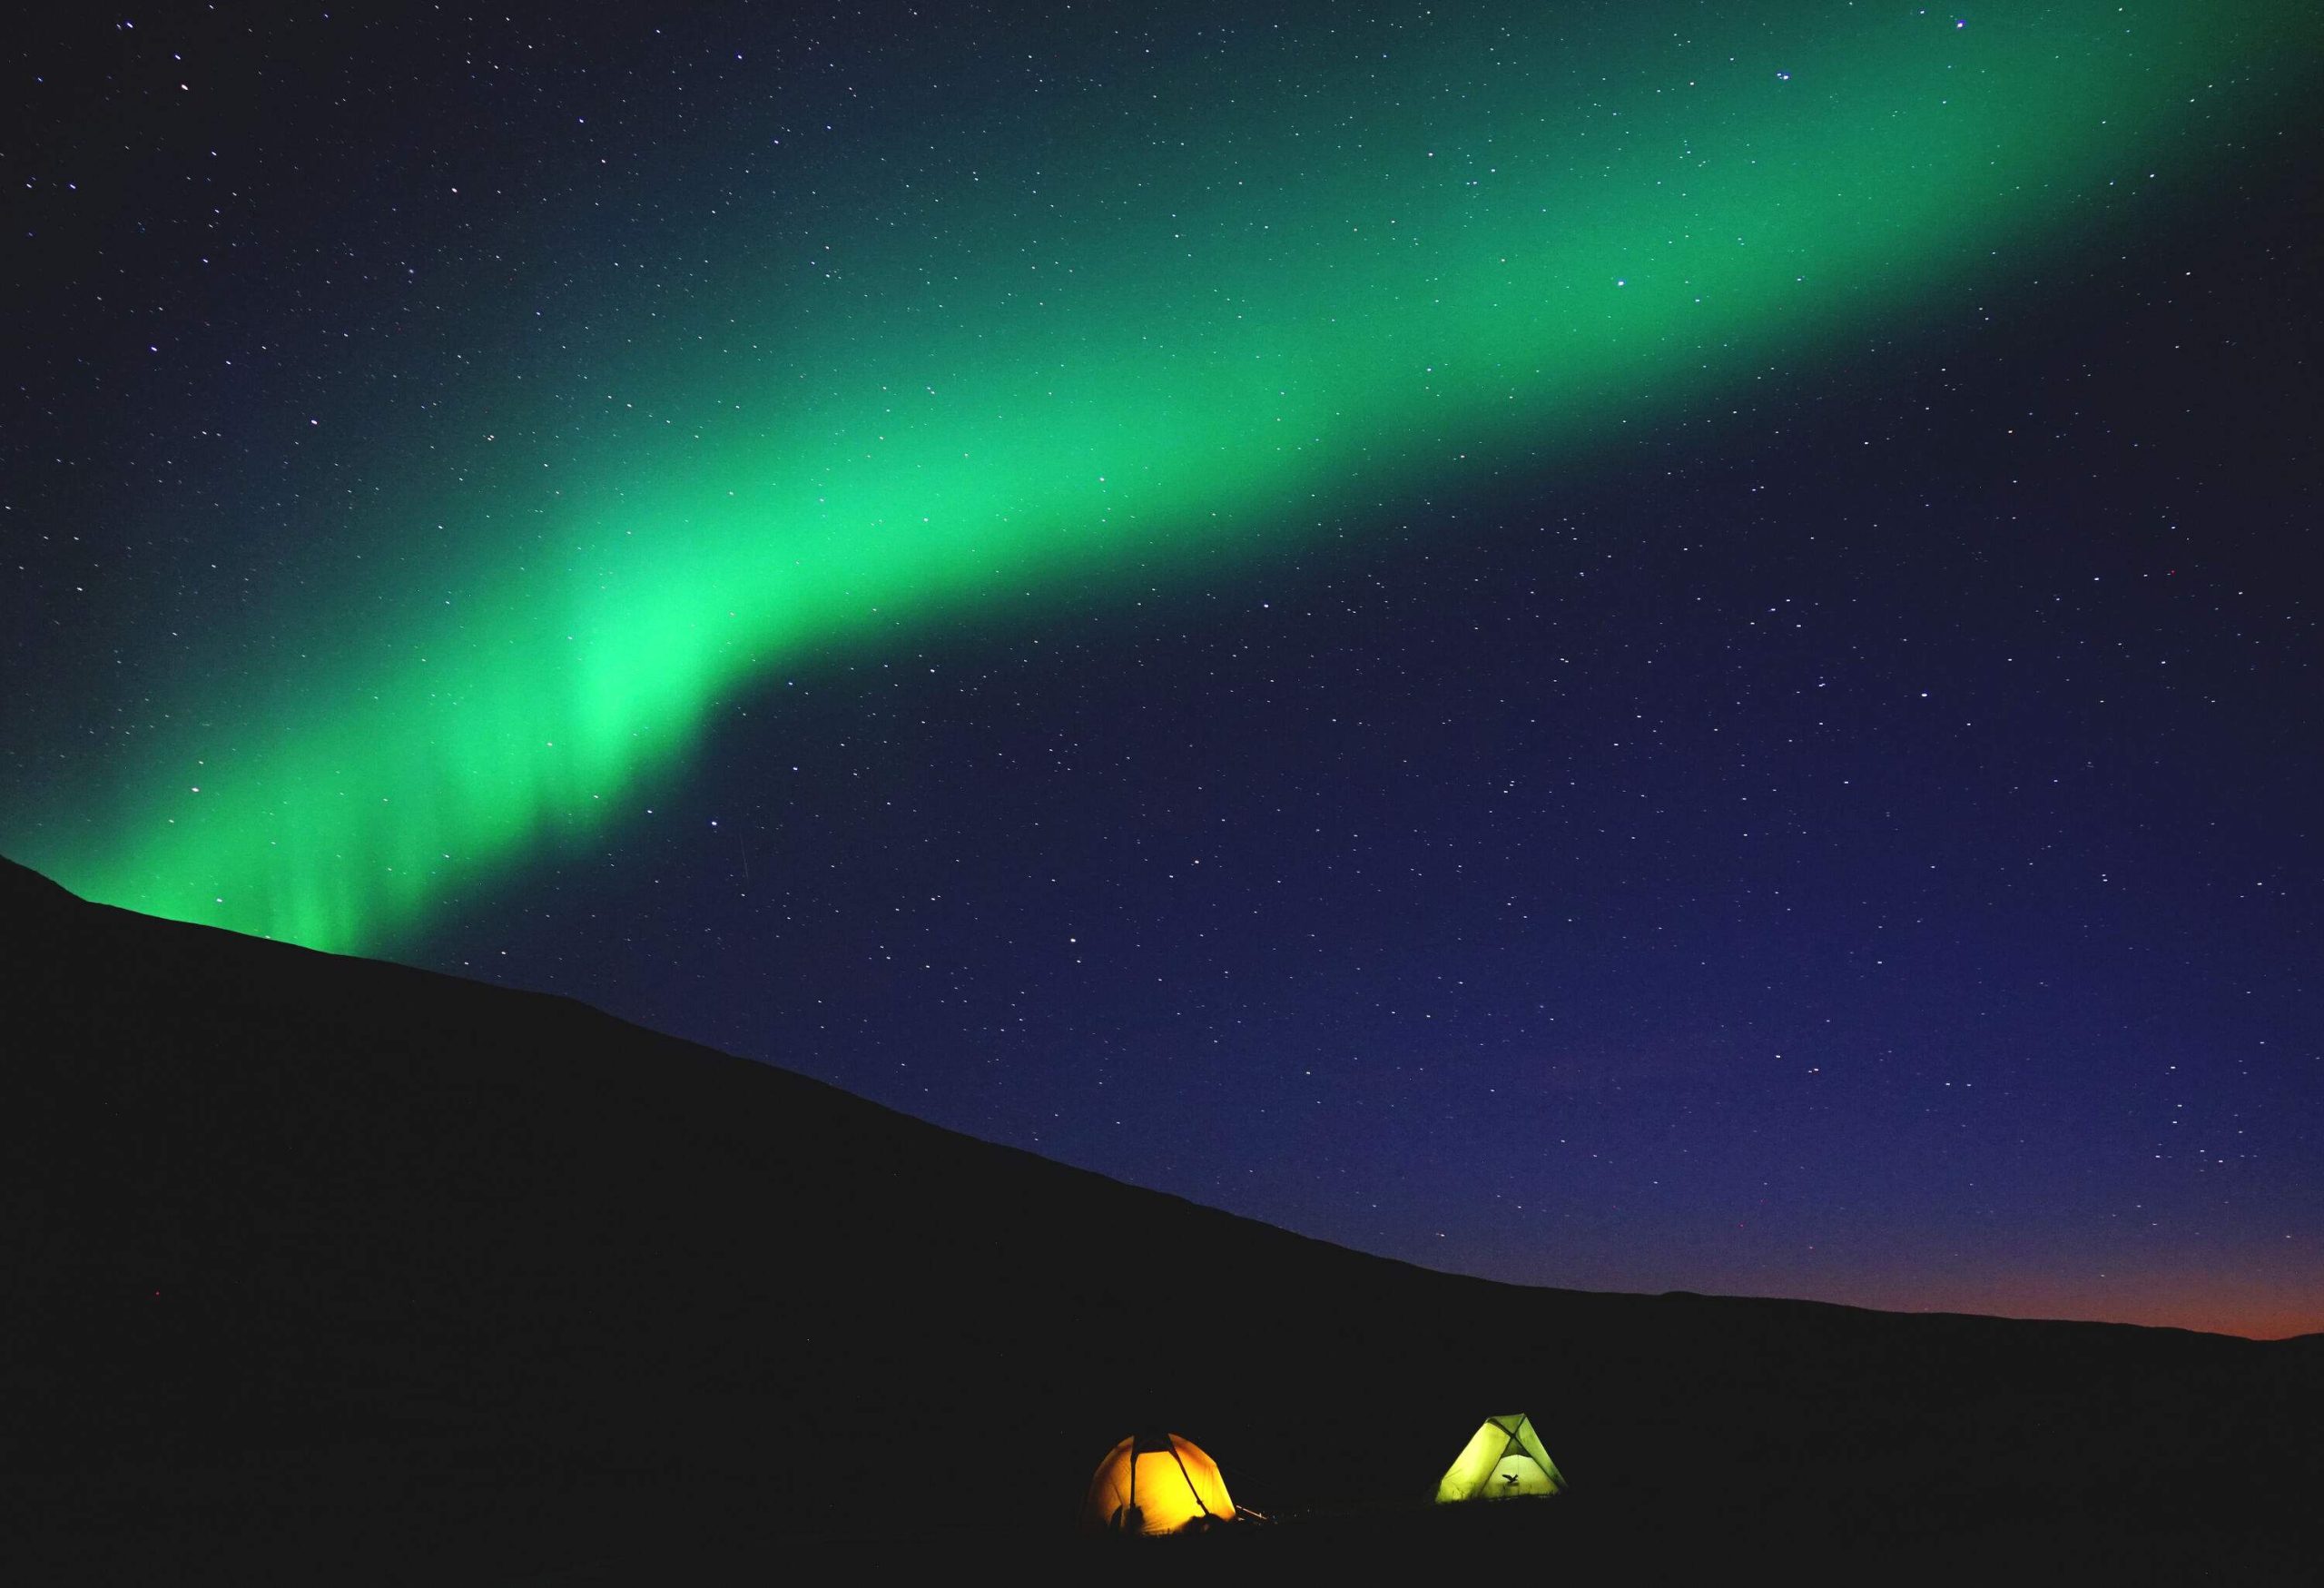 Two bright tents under a long stretch of green northern lights in the night sky.